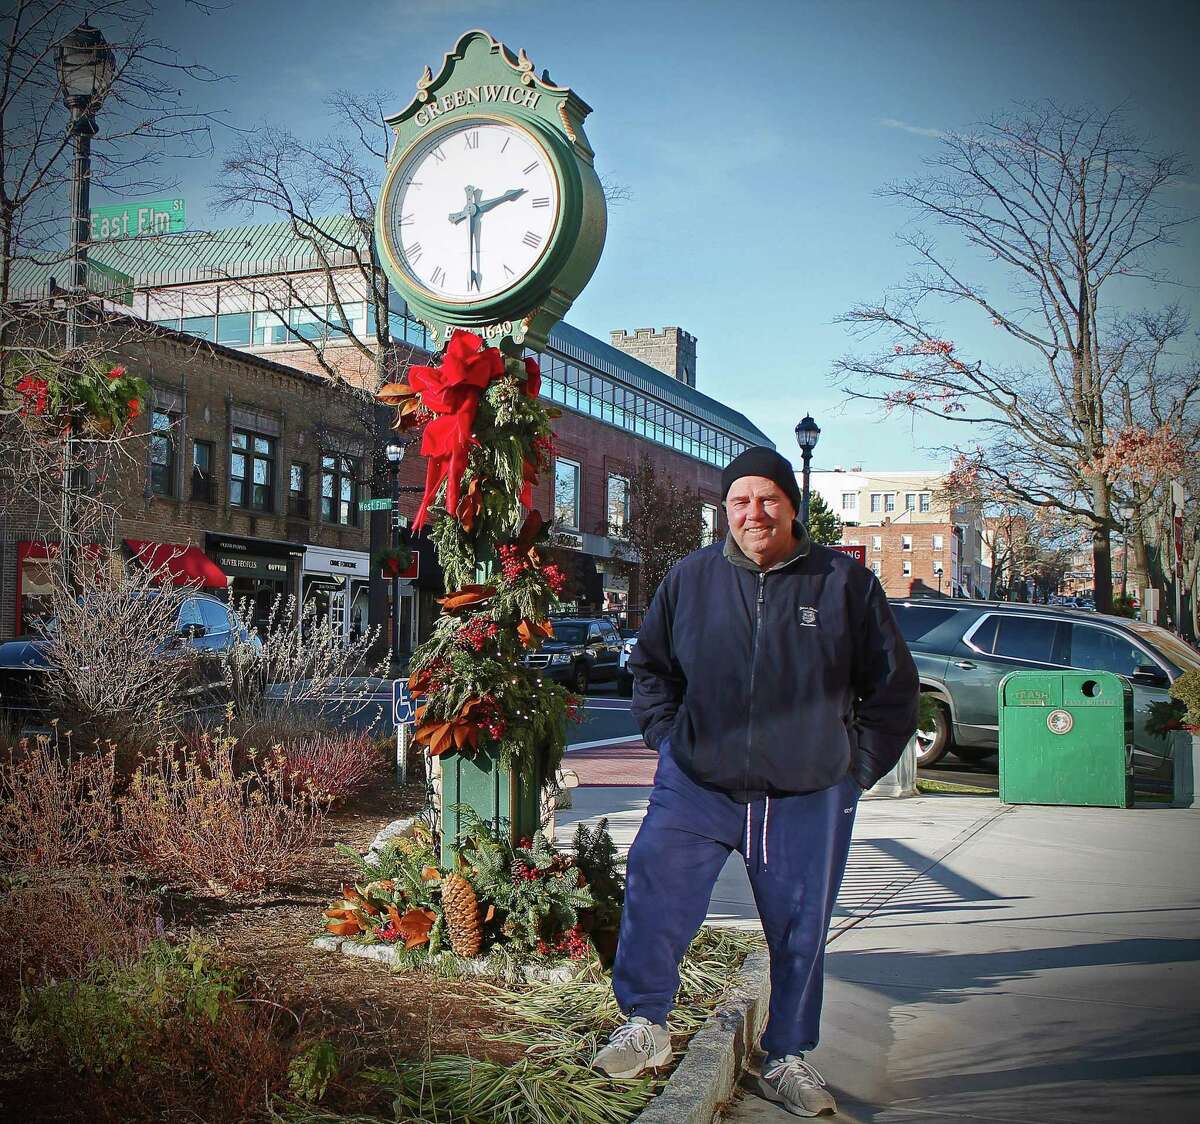 Tom Keegan, a longtime member of the Greenwich Police Department, at East Elm Street and Greenwich Avenue, where he spent many shifts directing traffic.